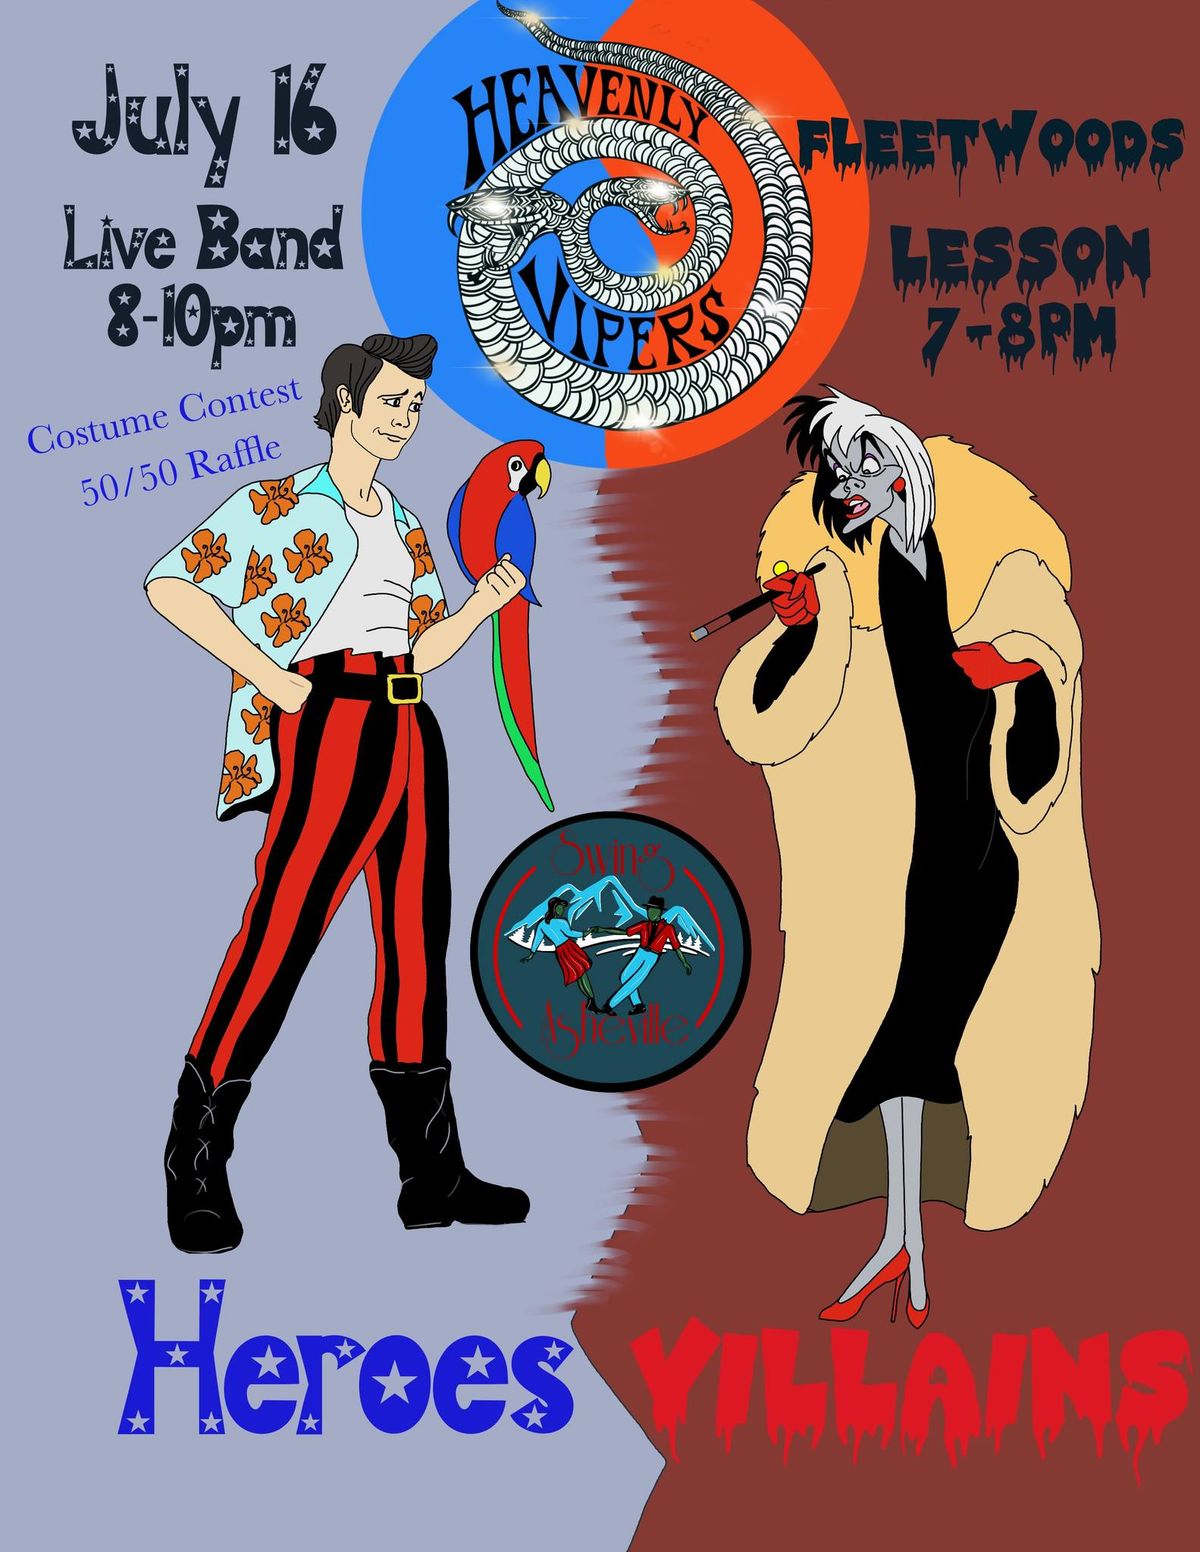 Heroes and Villains Dance Party featuring Heavenly Vipers!!